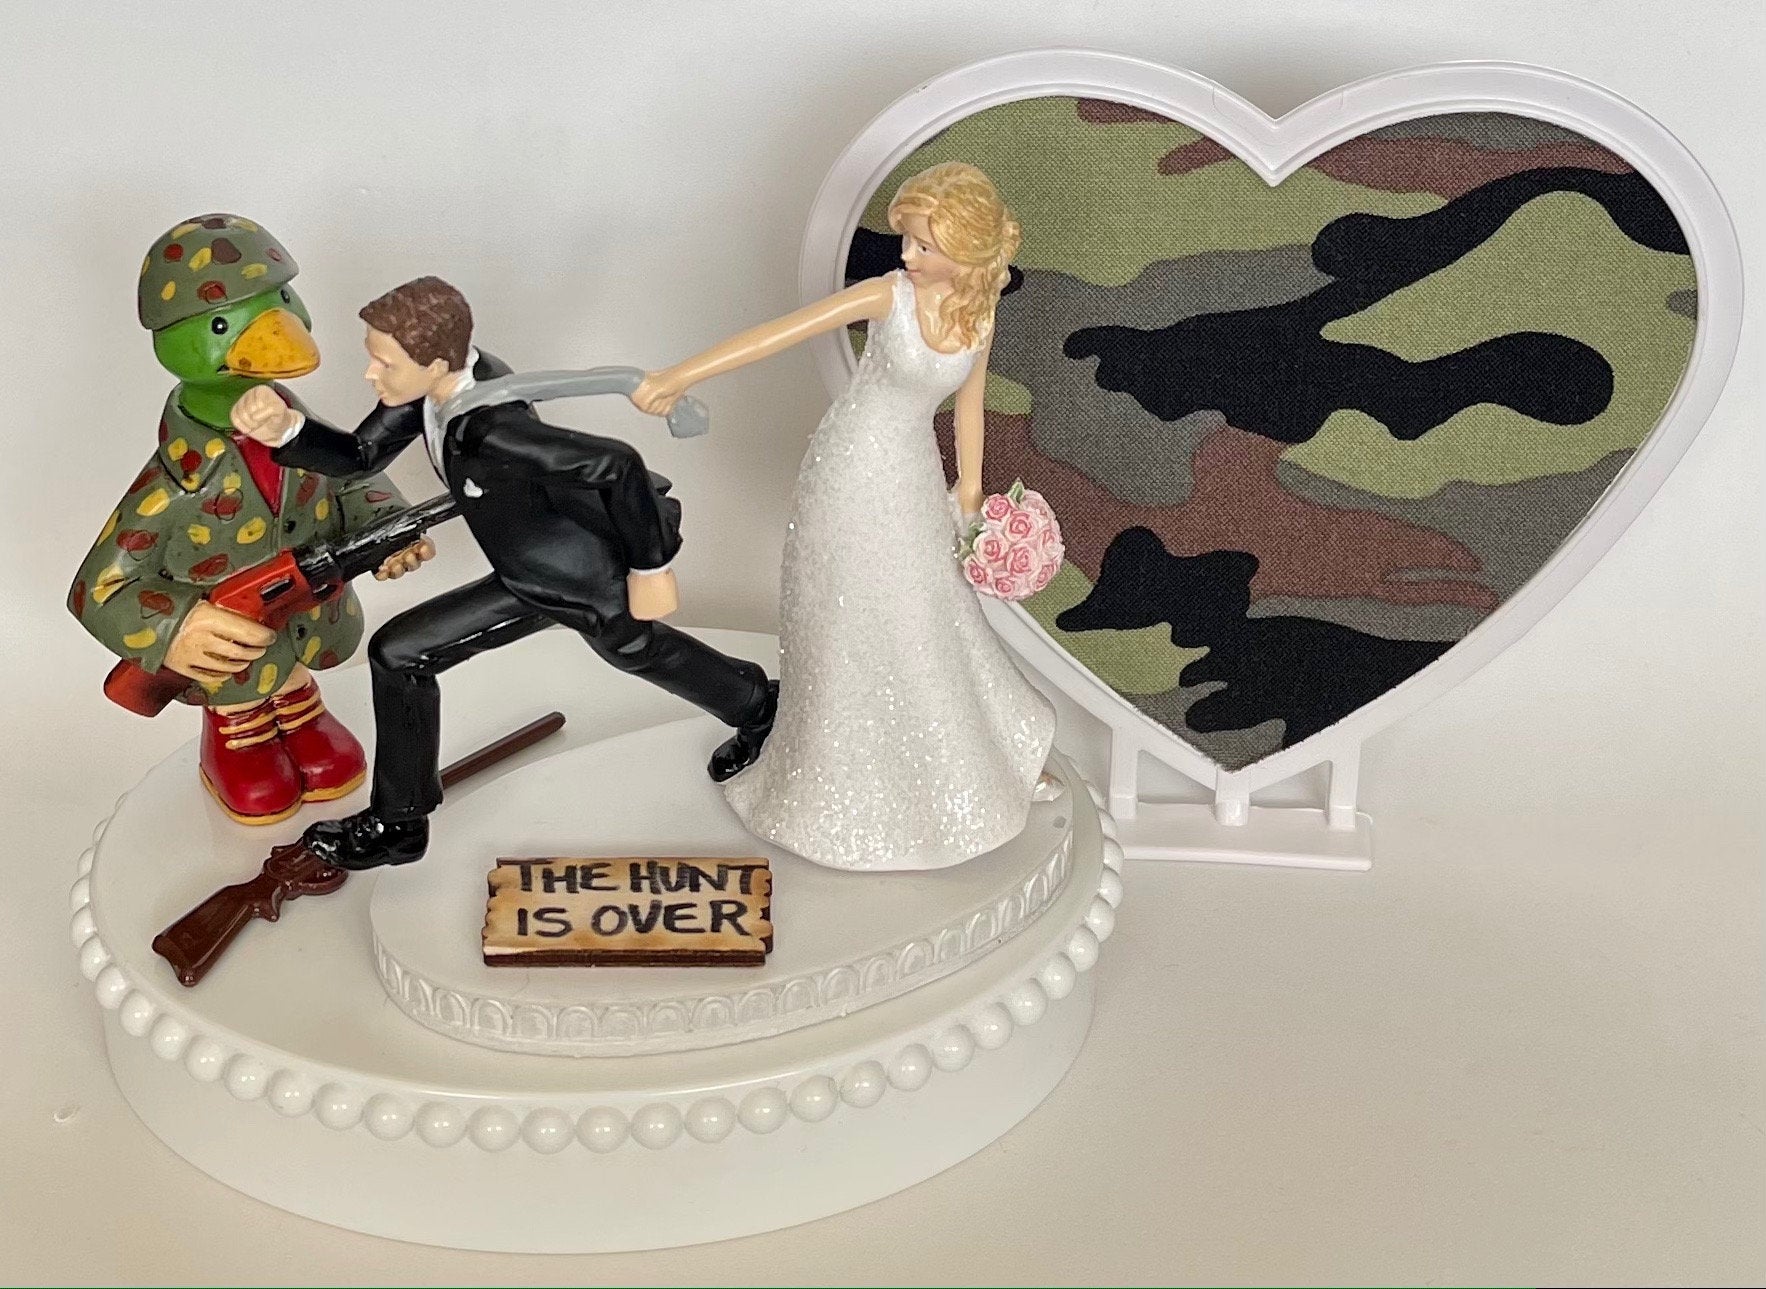 us navy wedding cake toppers